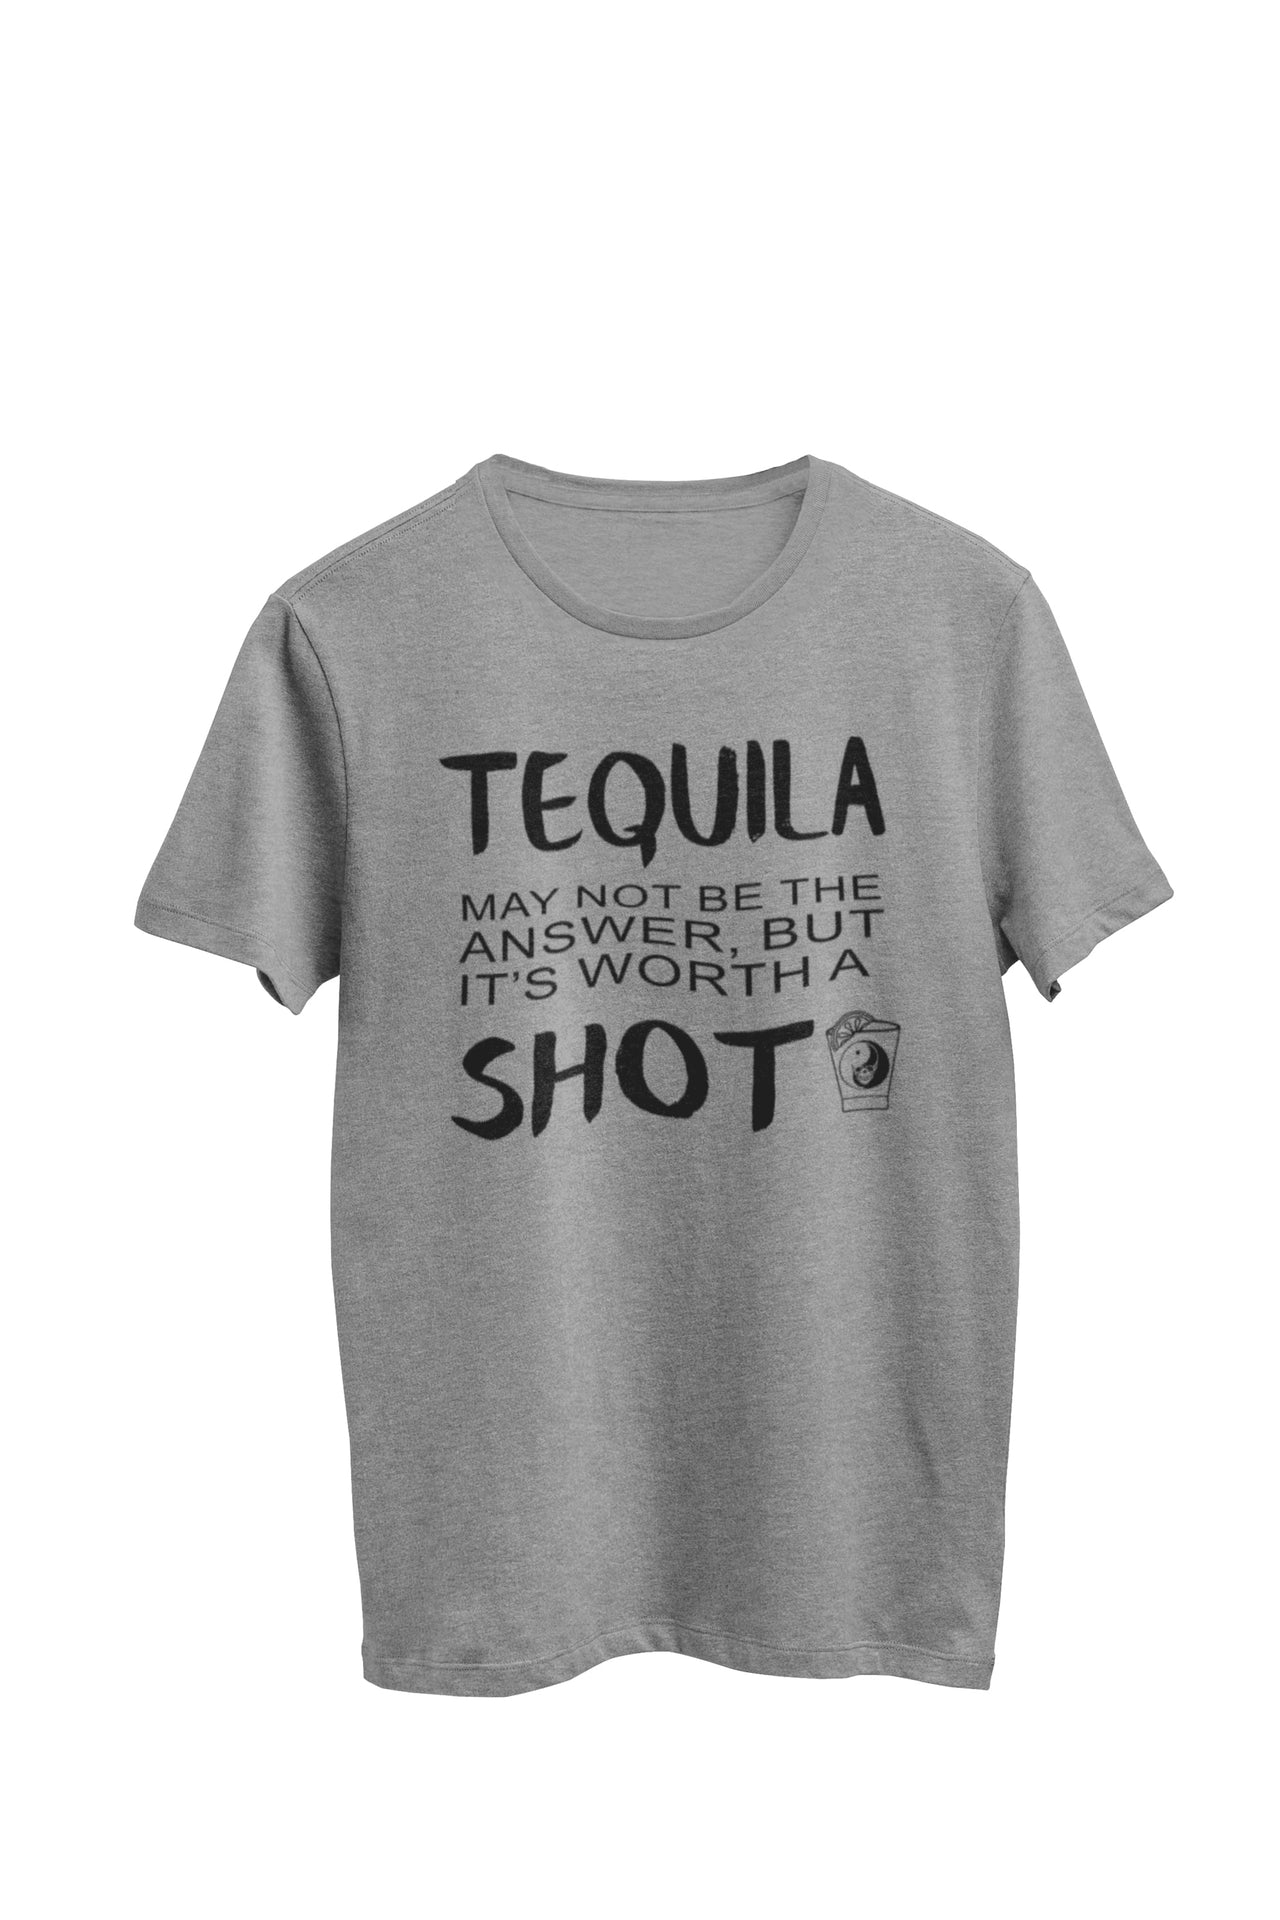 Gray Heather Unisex T-shirt with text: 'Tequila may not be the answer, but it's worth a shot.' The design features a shot glass with a yin yang symbol, created by WooHoo Apparel.